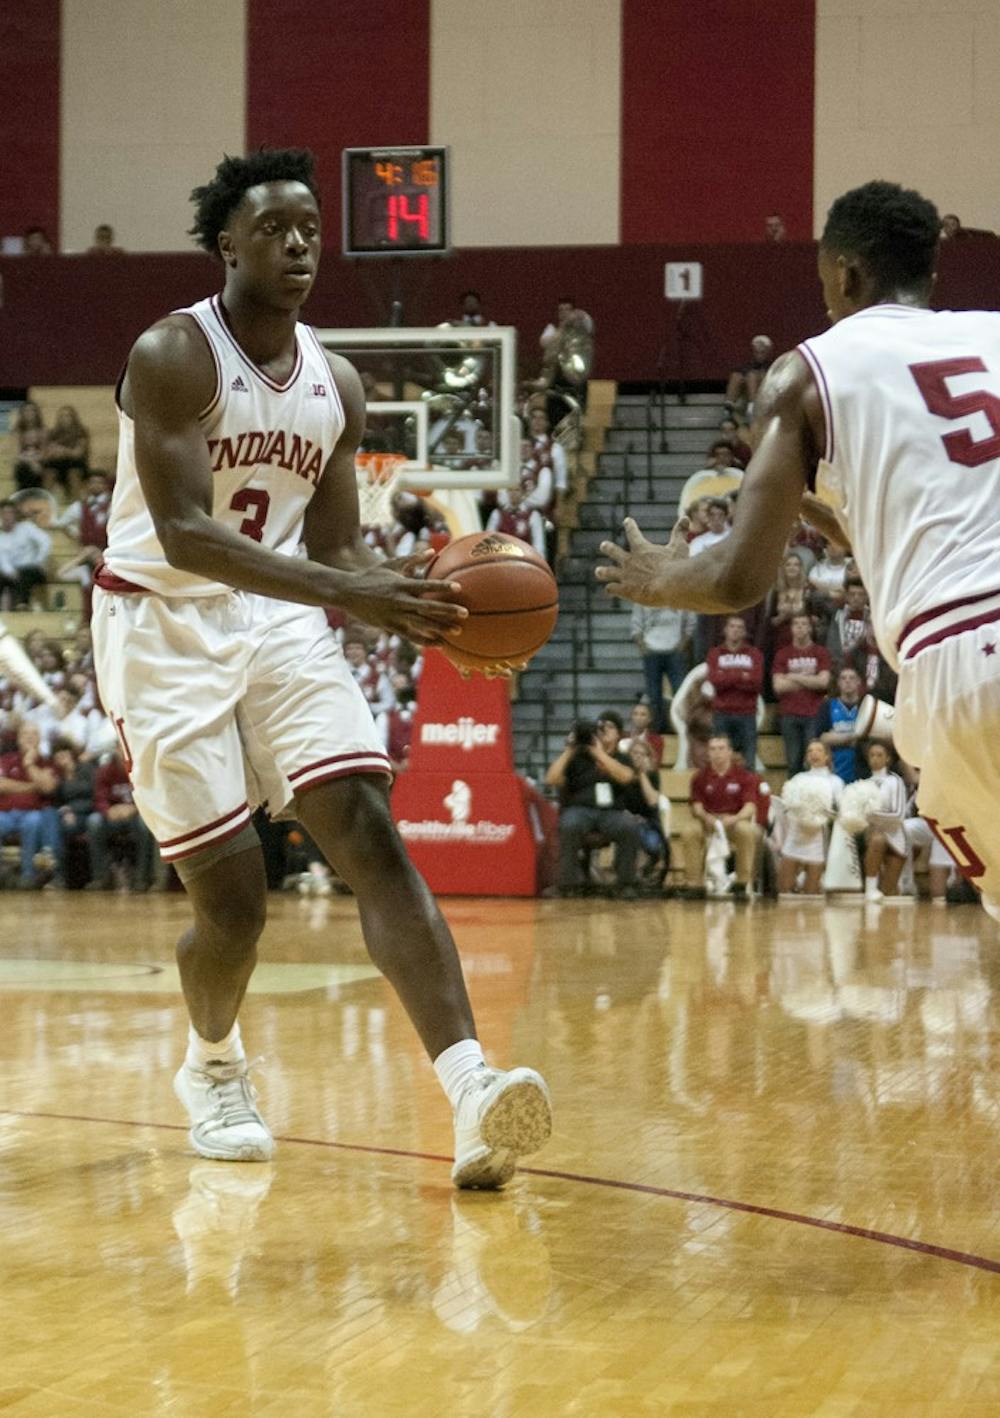 Freshman forward O.G. Anunoby (3) passes the ball to sophomore Troy Williams (5) during the game against Bellarmine on Monday evening at Assembly Hall. The Hoosiers won, 73-62.